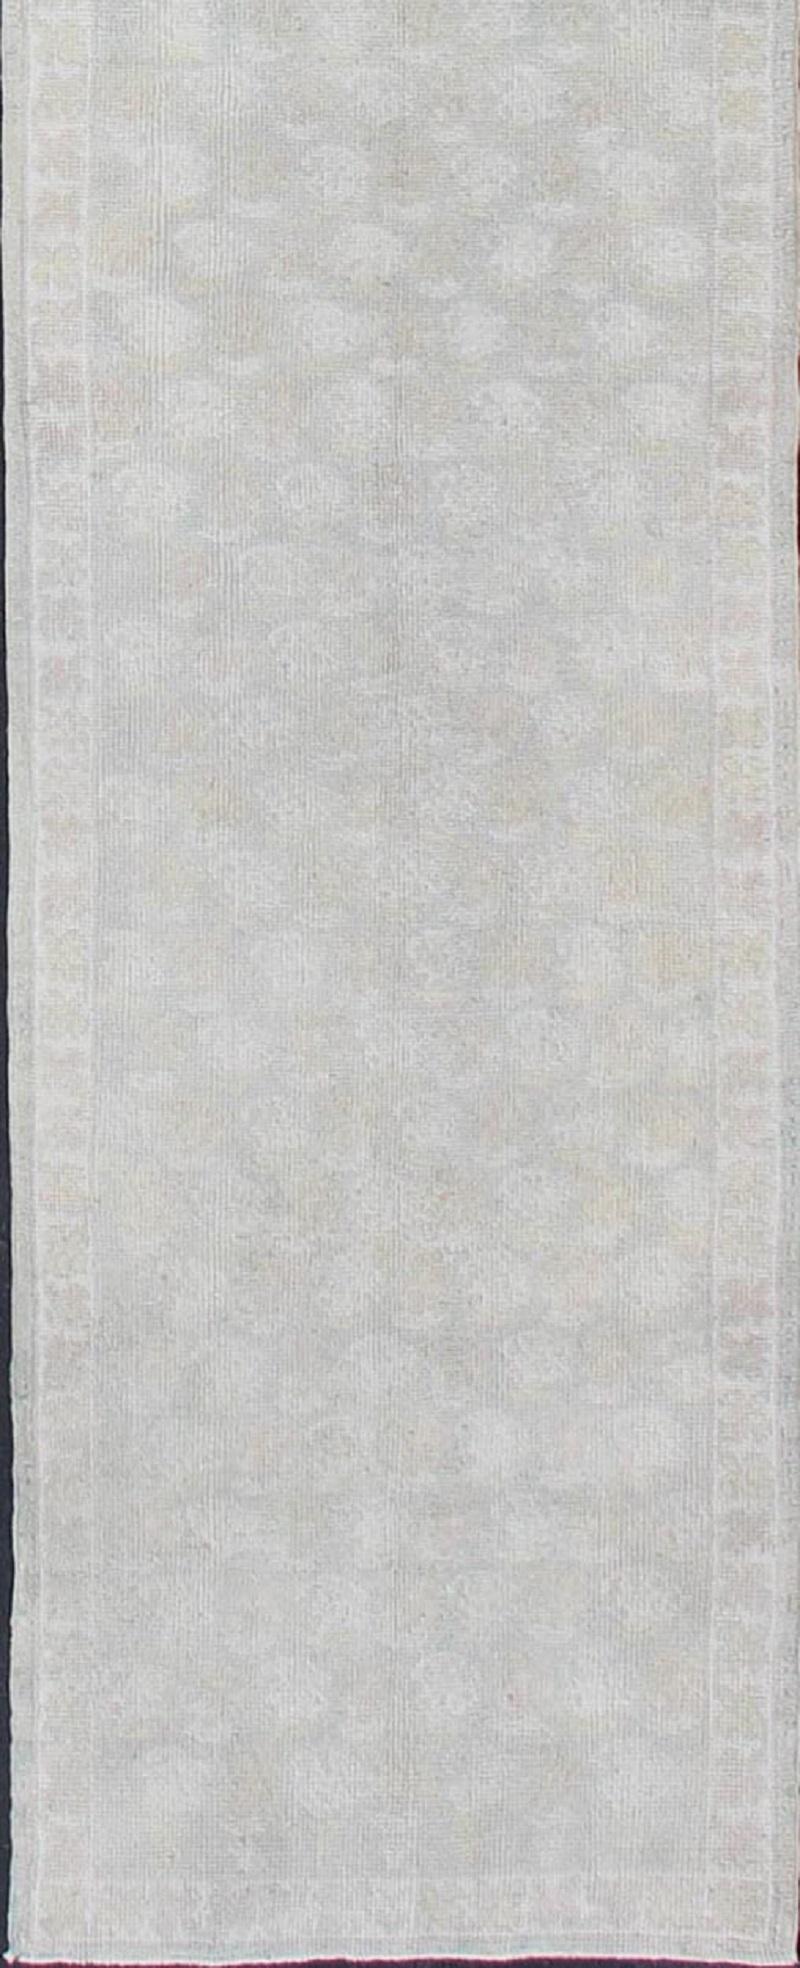 This unique Turkish Oushak carpet features an all-over design of intricate paisley shapes set atop a central field of light tones. The entire piece is encompassed by a floral border. Accent colors are rendered in muted tones.

Measures: 3'3'' x